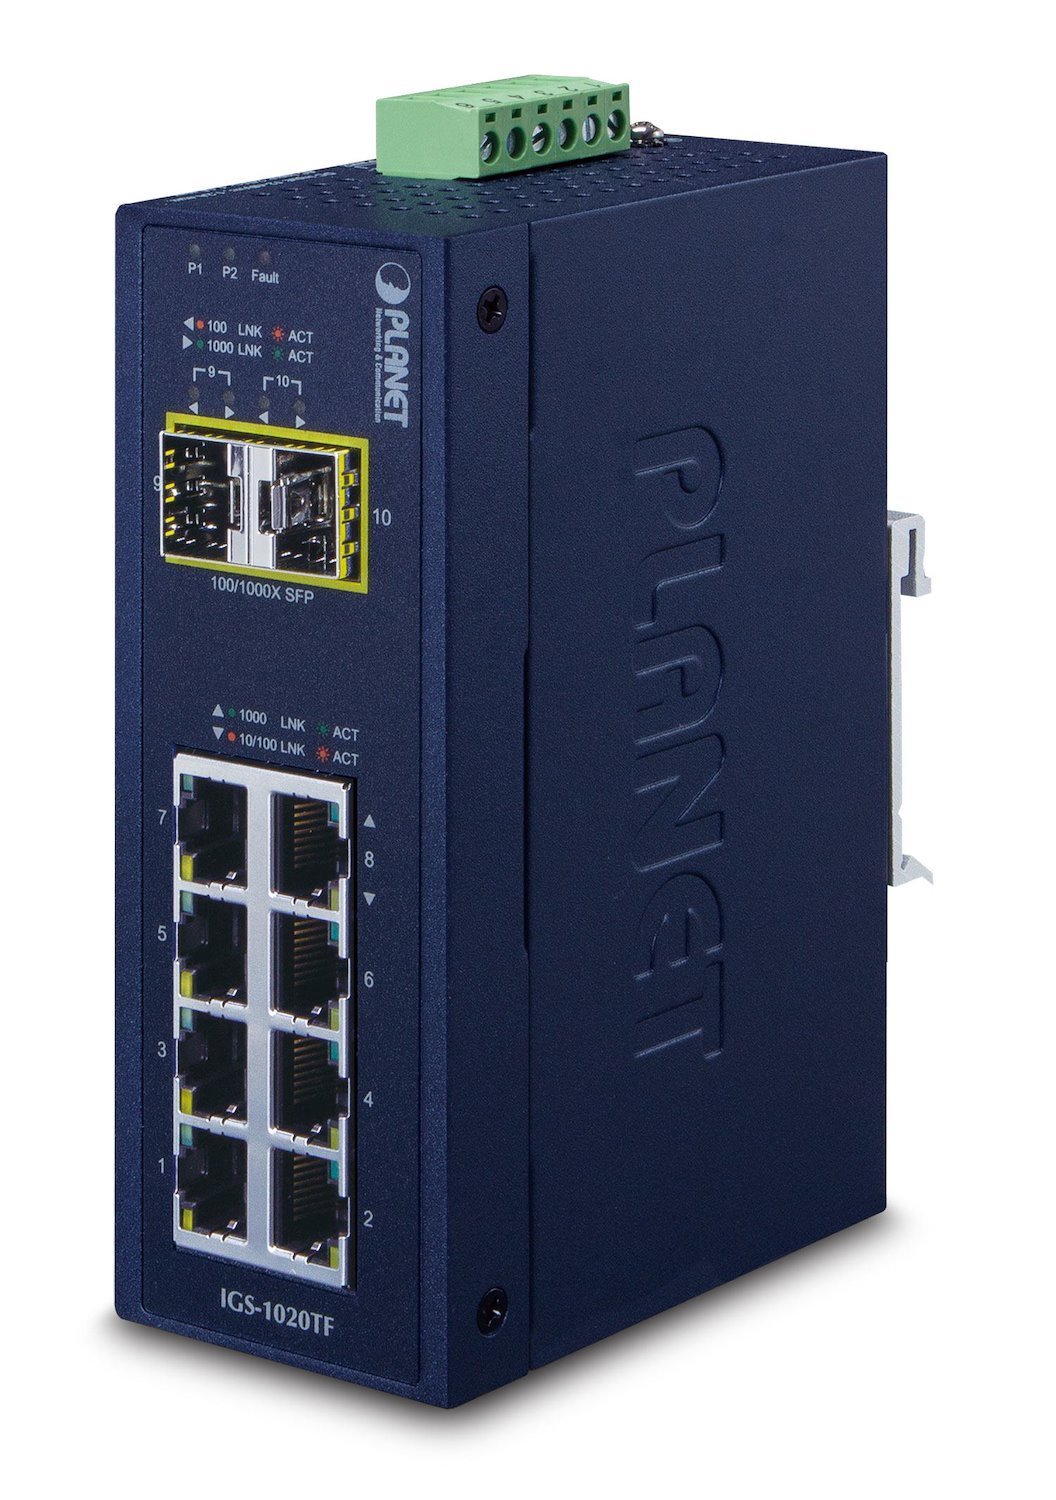 Planet Igs-1020Tf Network Switch Unmanaged Gigabit Ethernet [10/100/1000] Blue (Ip30 Industrial 8-P 10/100/100 - + 2-P 100/1000X SFP Ethernet - Switch [-40~75 Degrees C] - Warranty: 60M)